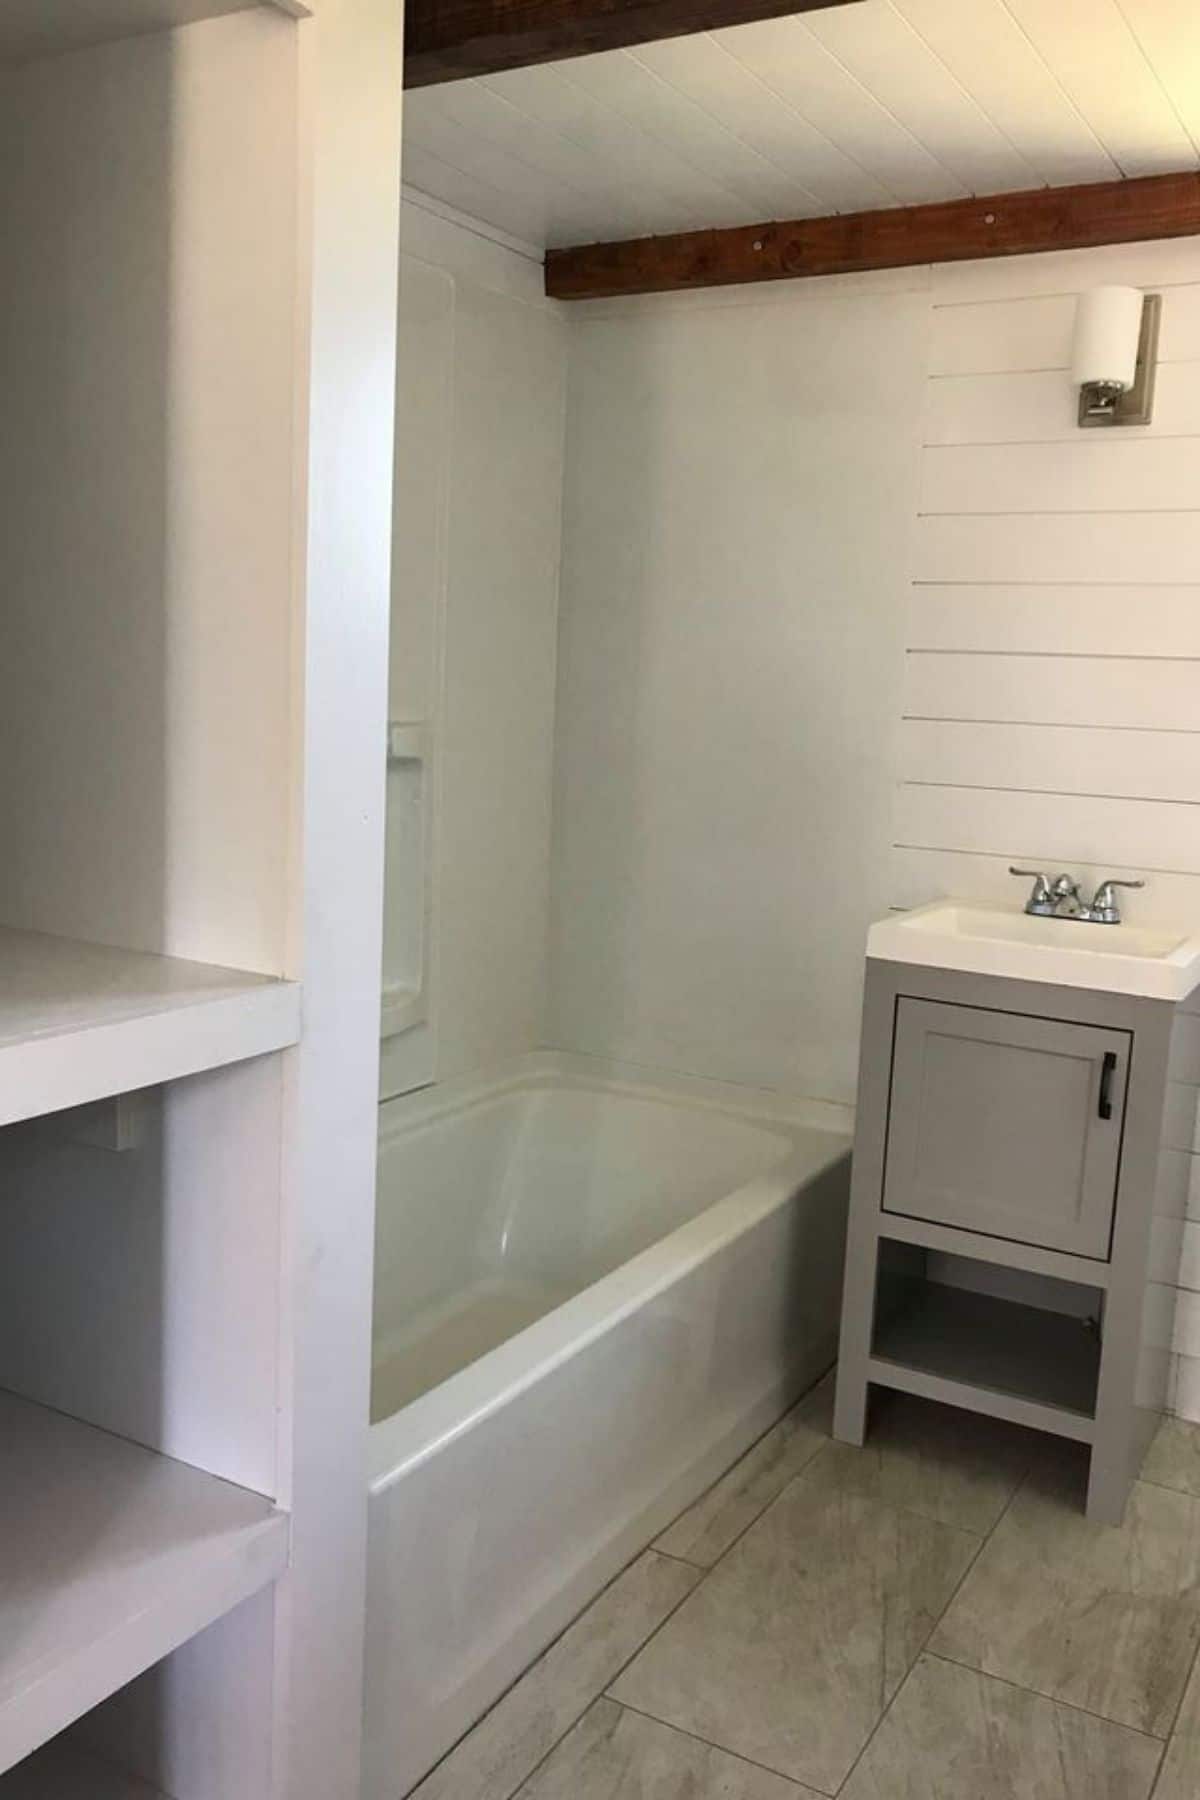 View into tiny house bathroom with shelves in foreground and bathtub in back